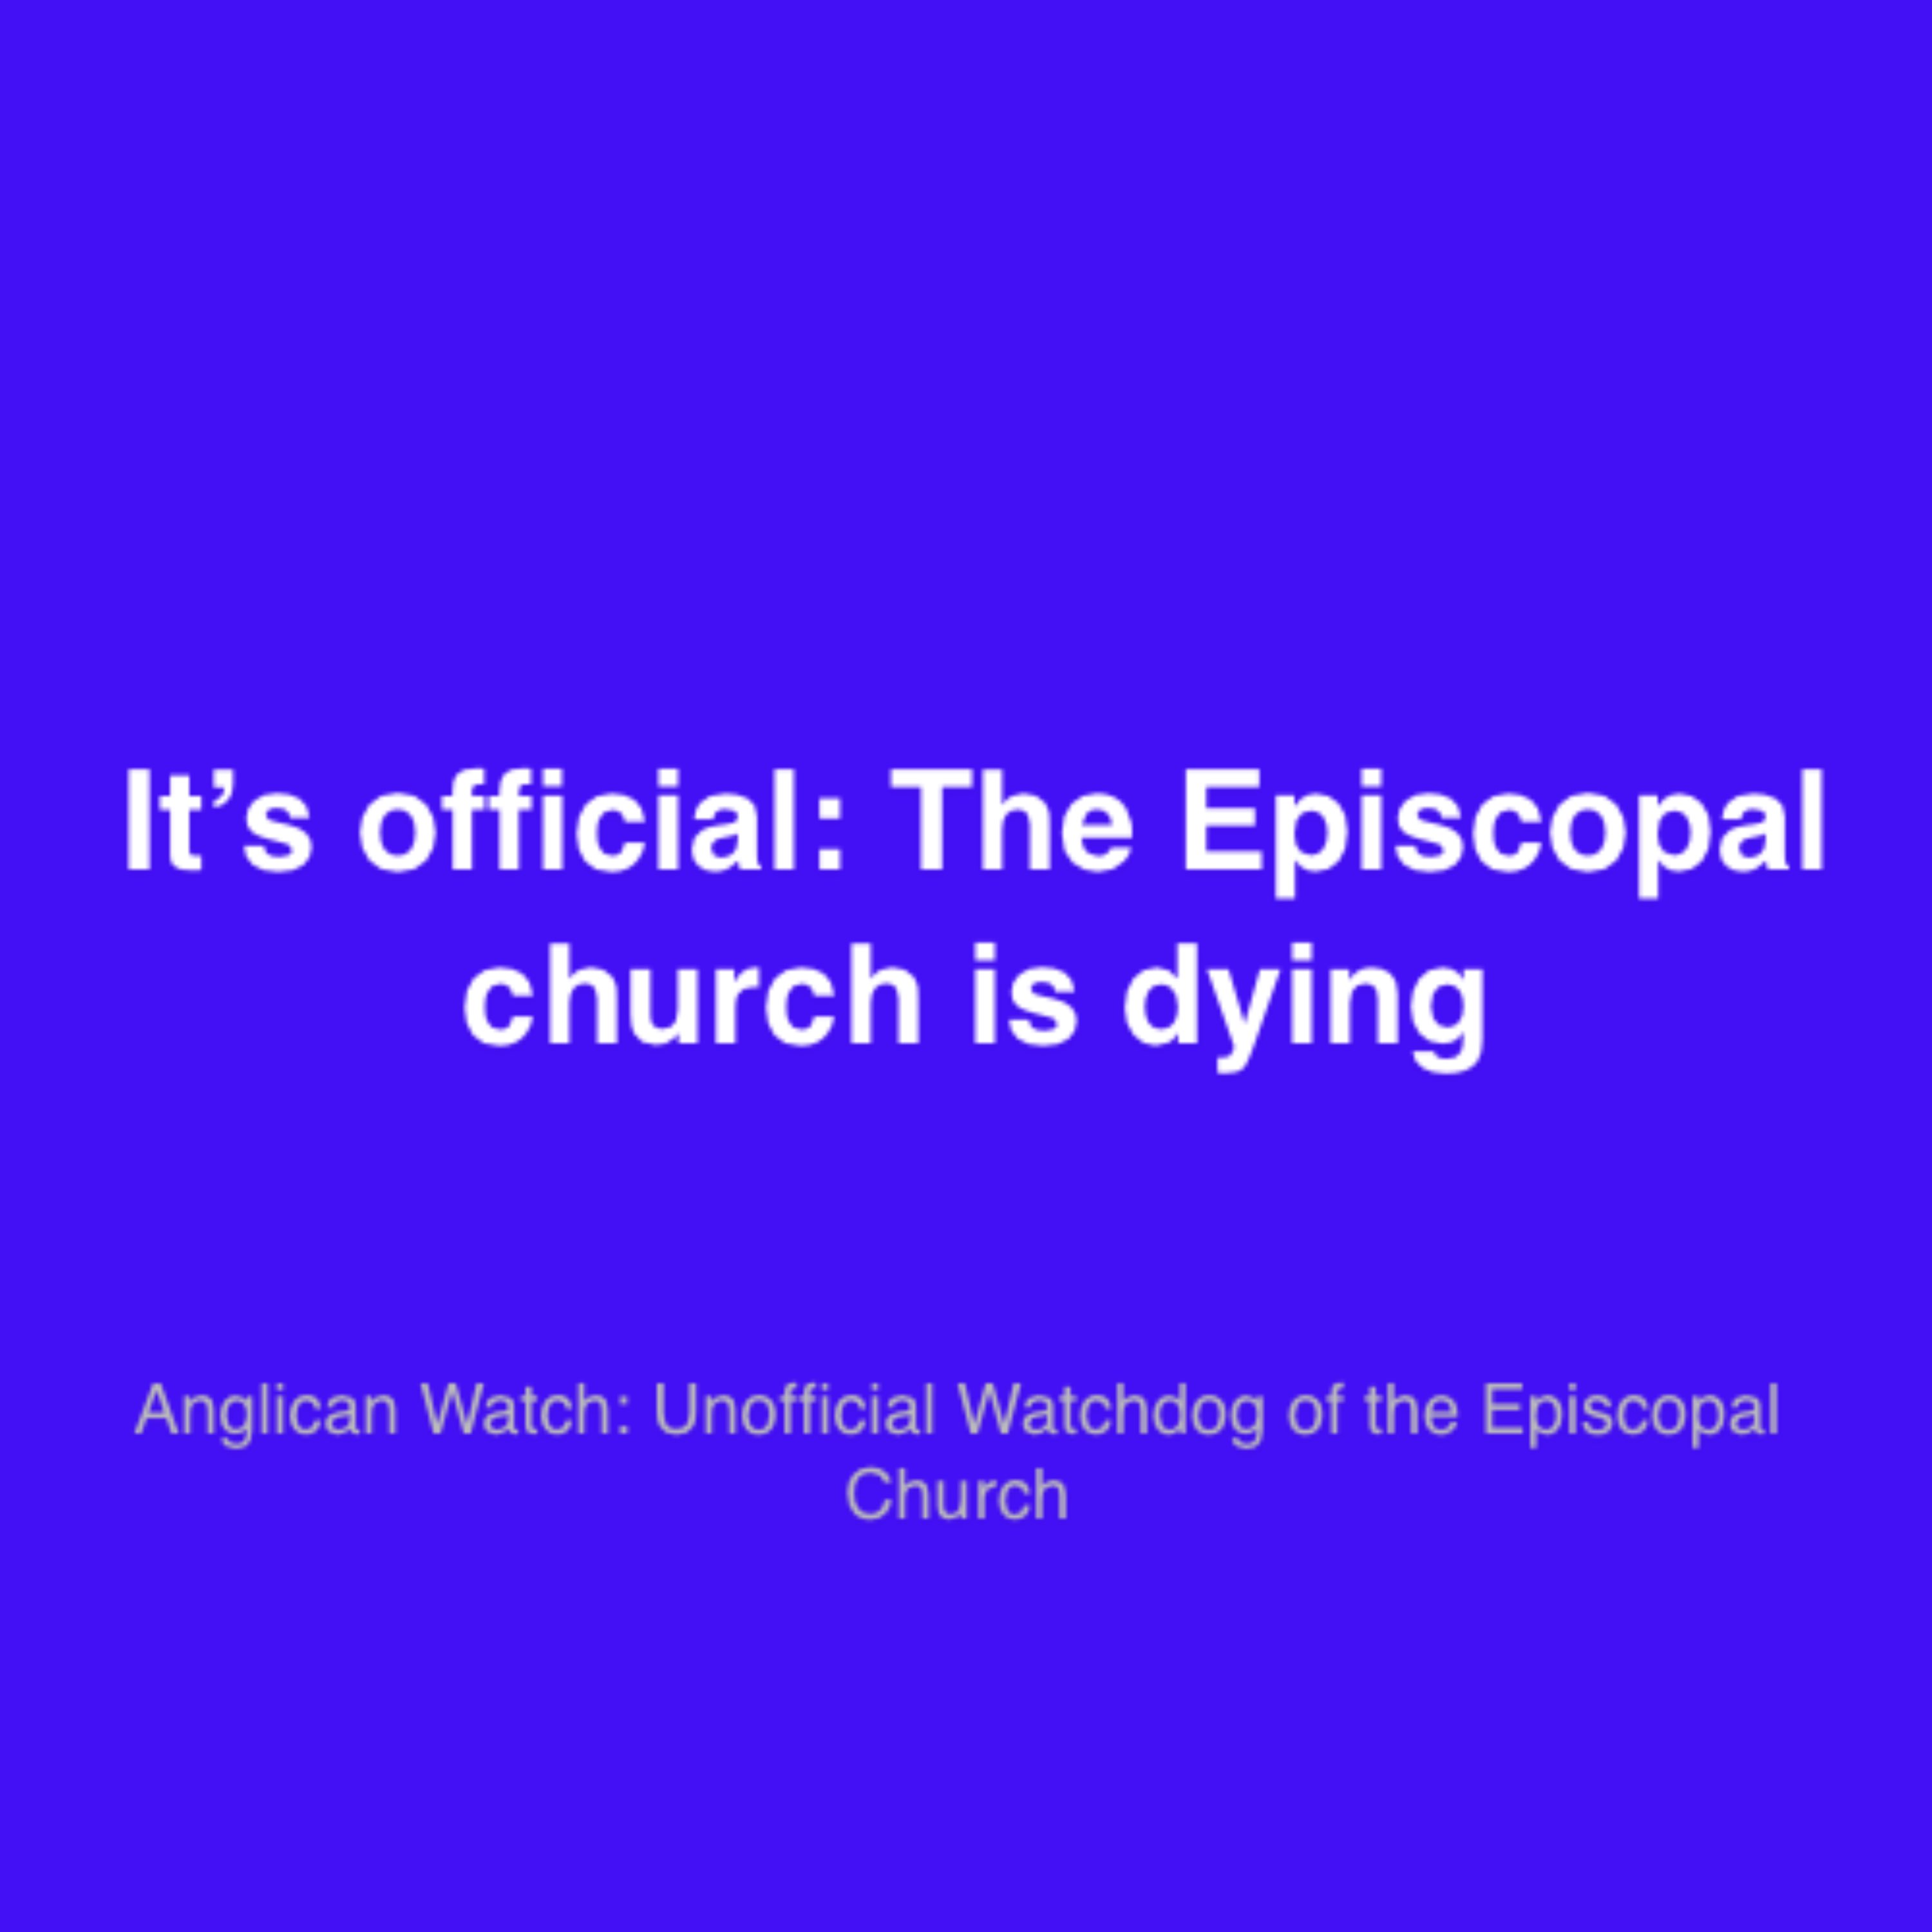 It’s official: The Episcopal church is dying